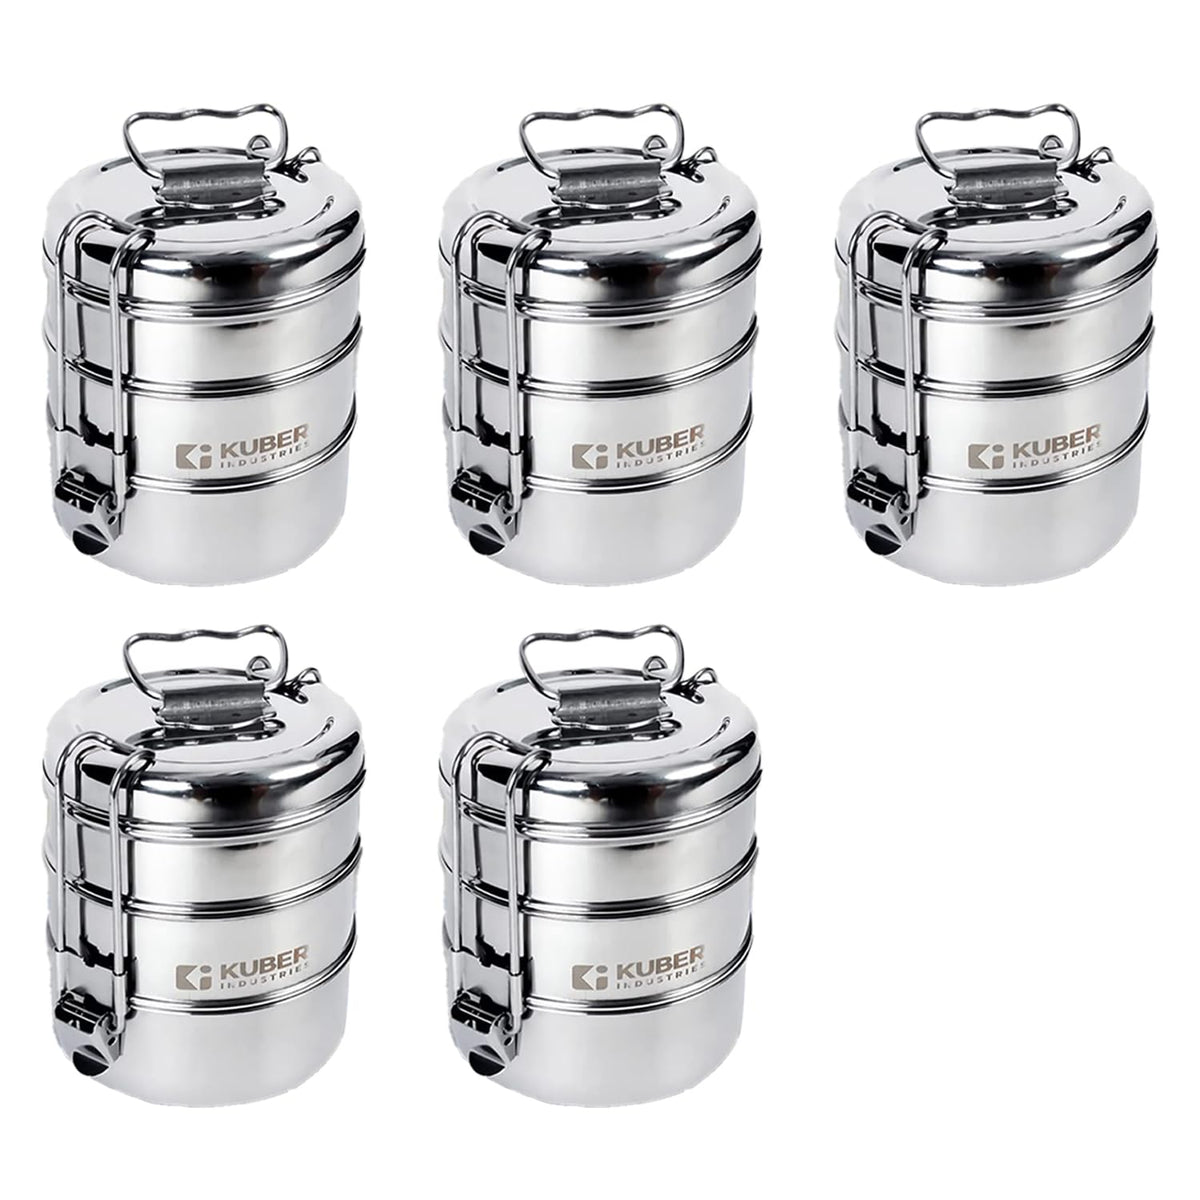 Kuber Industries Clipper Stainless Steel Tiffin Box | Lunch Box with Locking Clip I Silver | Set of 3 Box | Everyday use Home Office Steel Lunch Box (3 Container, 1000ml) (Pack of 3)